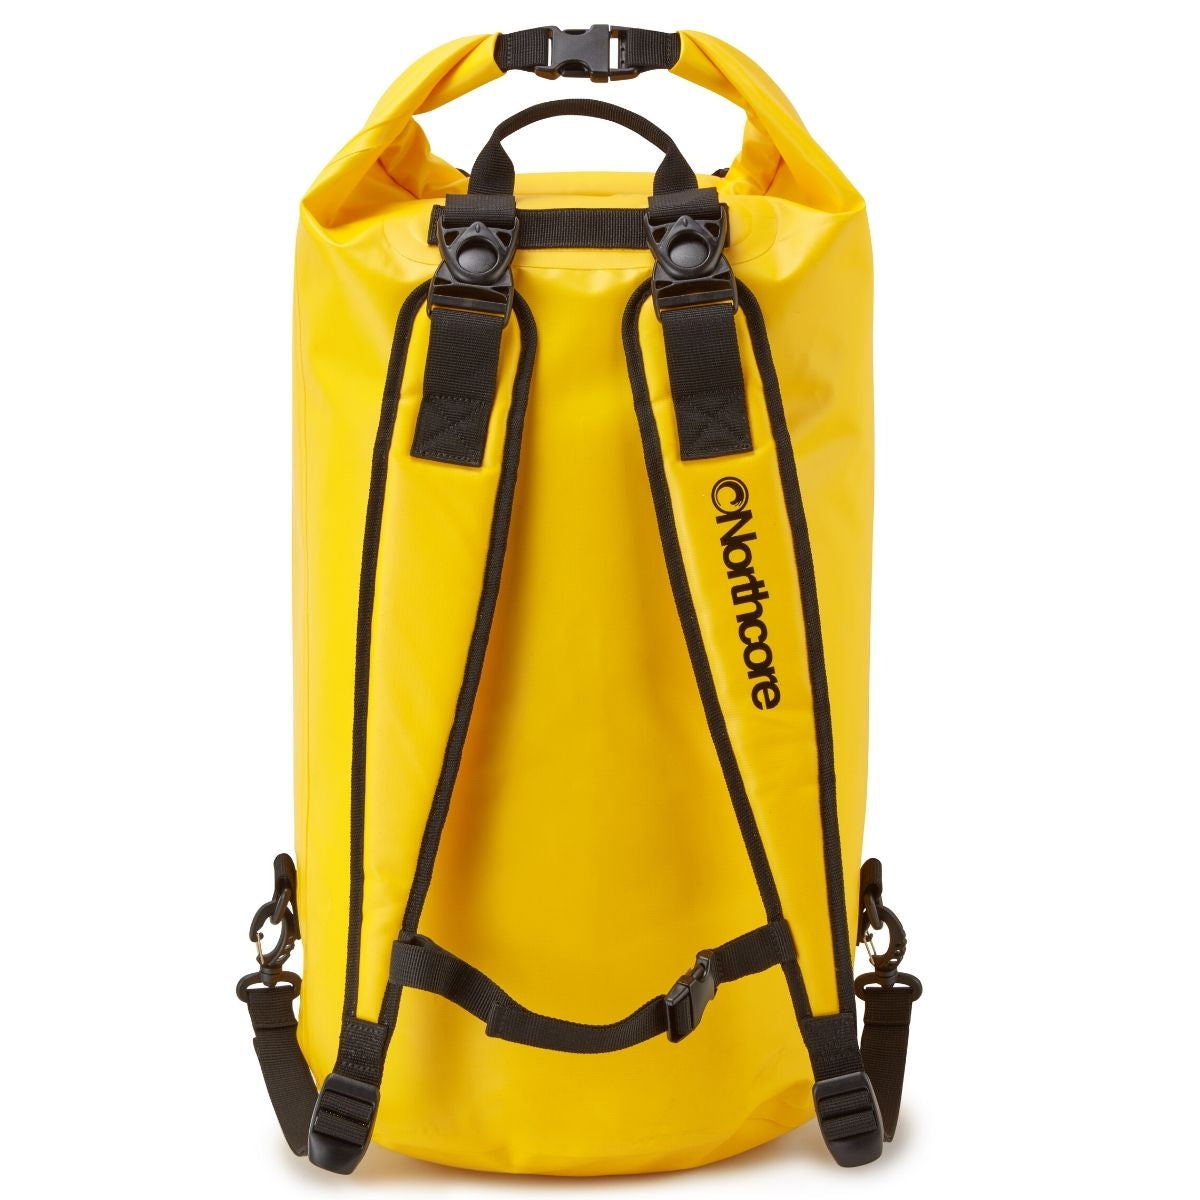 Northcore Waterproof Dry Bag Backpack 40l Yellow Back